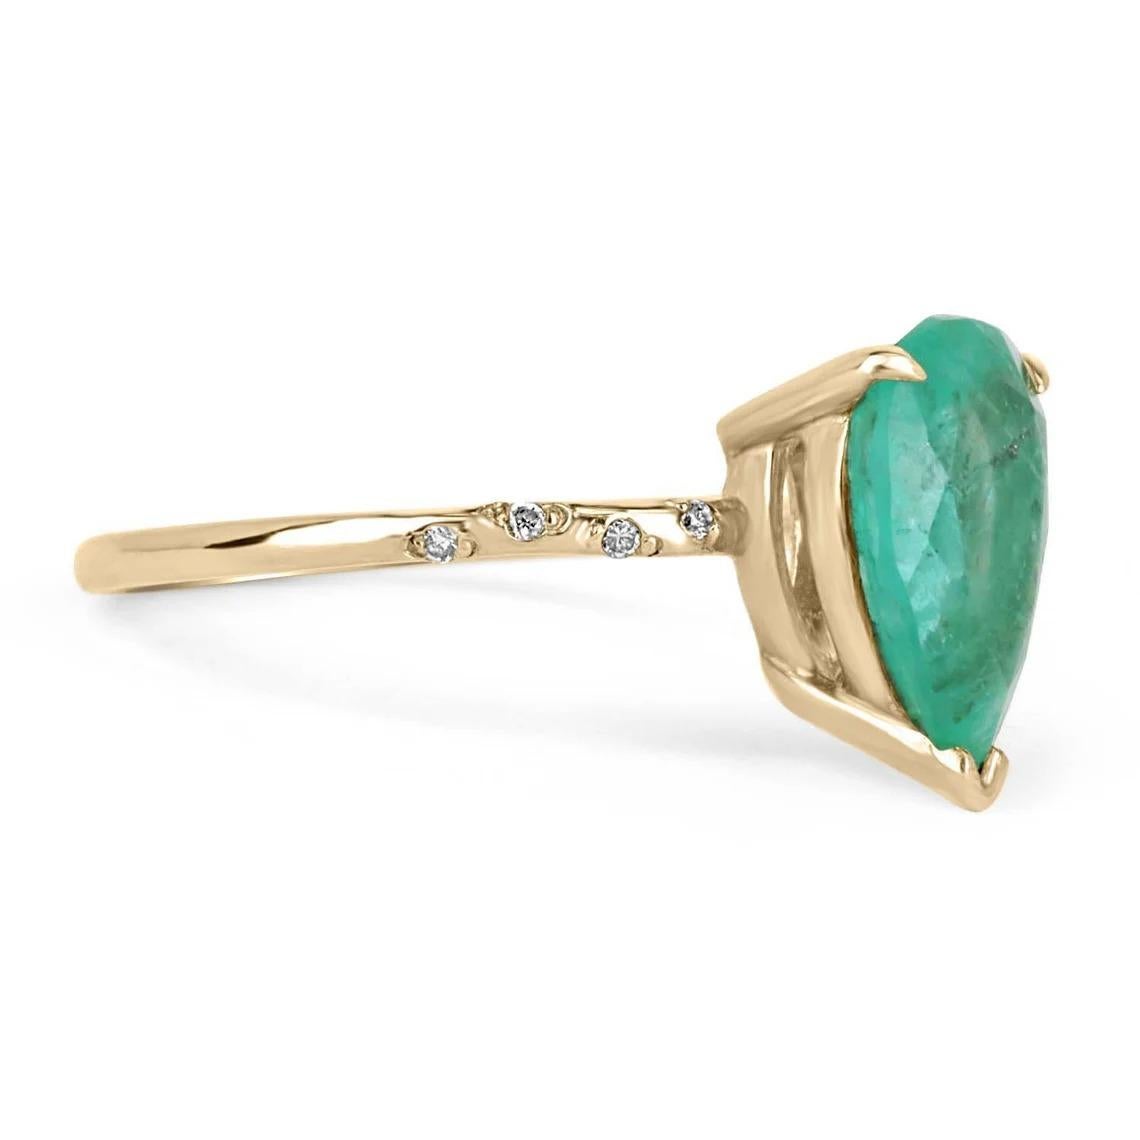 Setting Style: Solitaire w/ Accents
Setting Material: 14K Yellow Gold
Weight: 2.2 Grams

Main Stone: Colombian Emerald
Shape: Pear Cut
Approx Weight: 2.14-Carats
Color: Green
Luster: Very Good - Good
Origin: Colombia
Treatments: Natural,